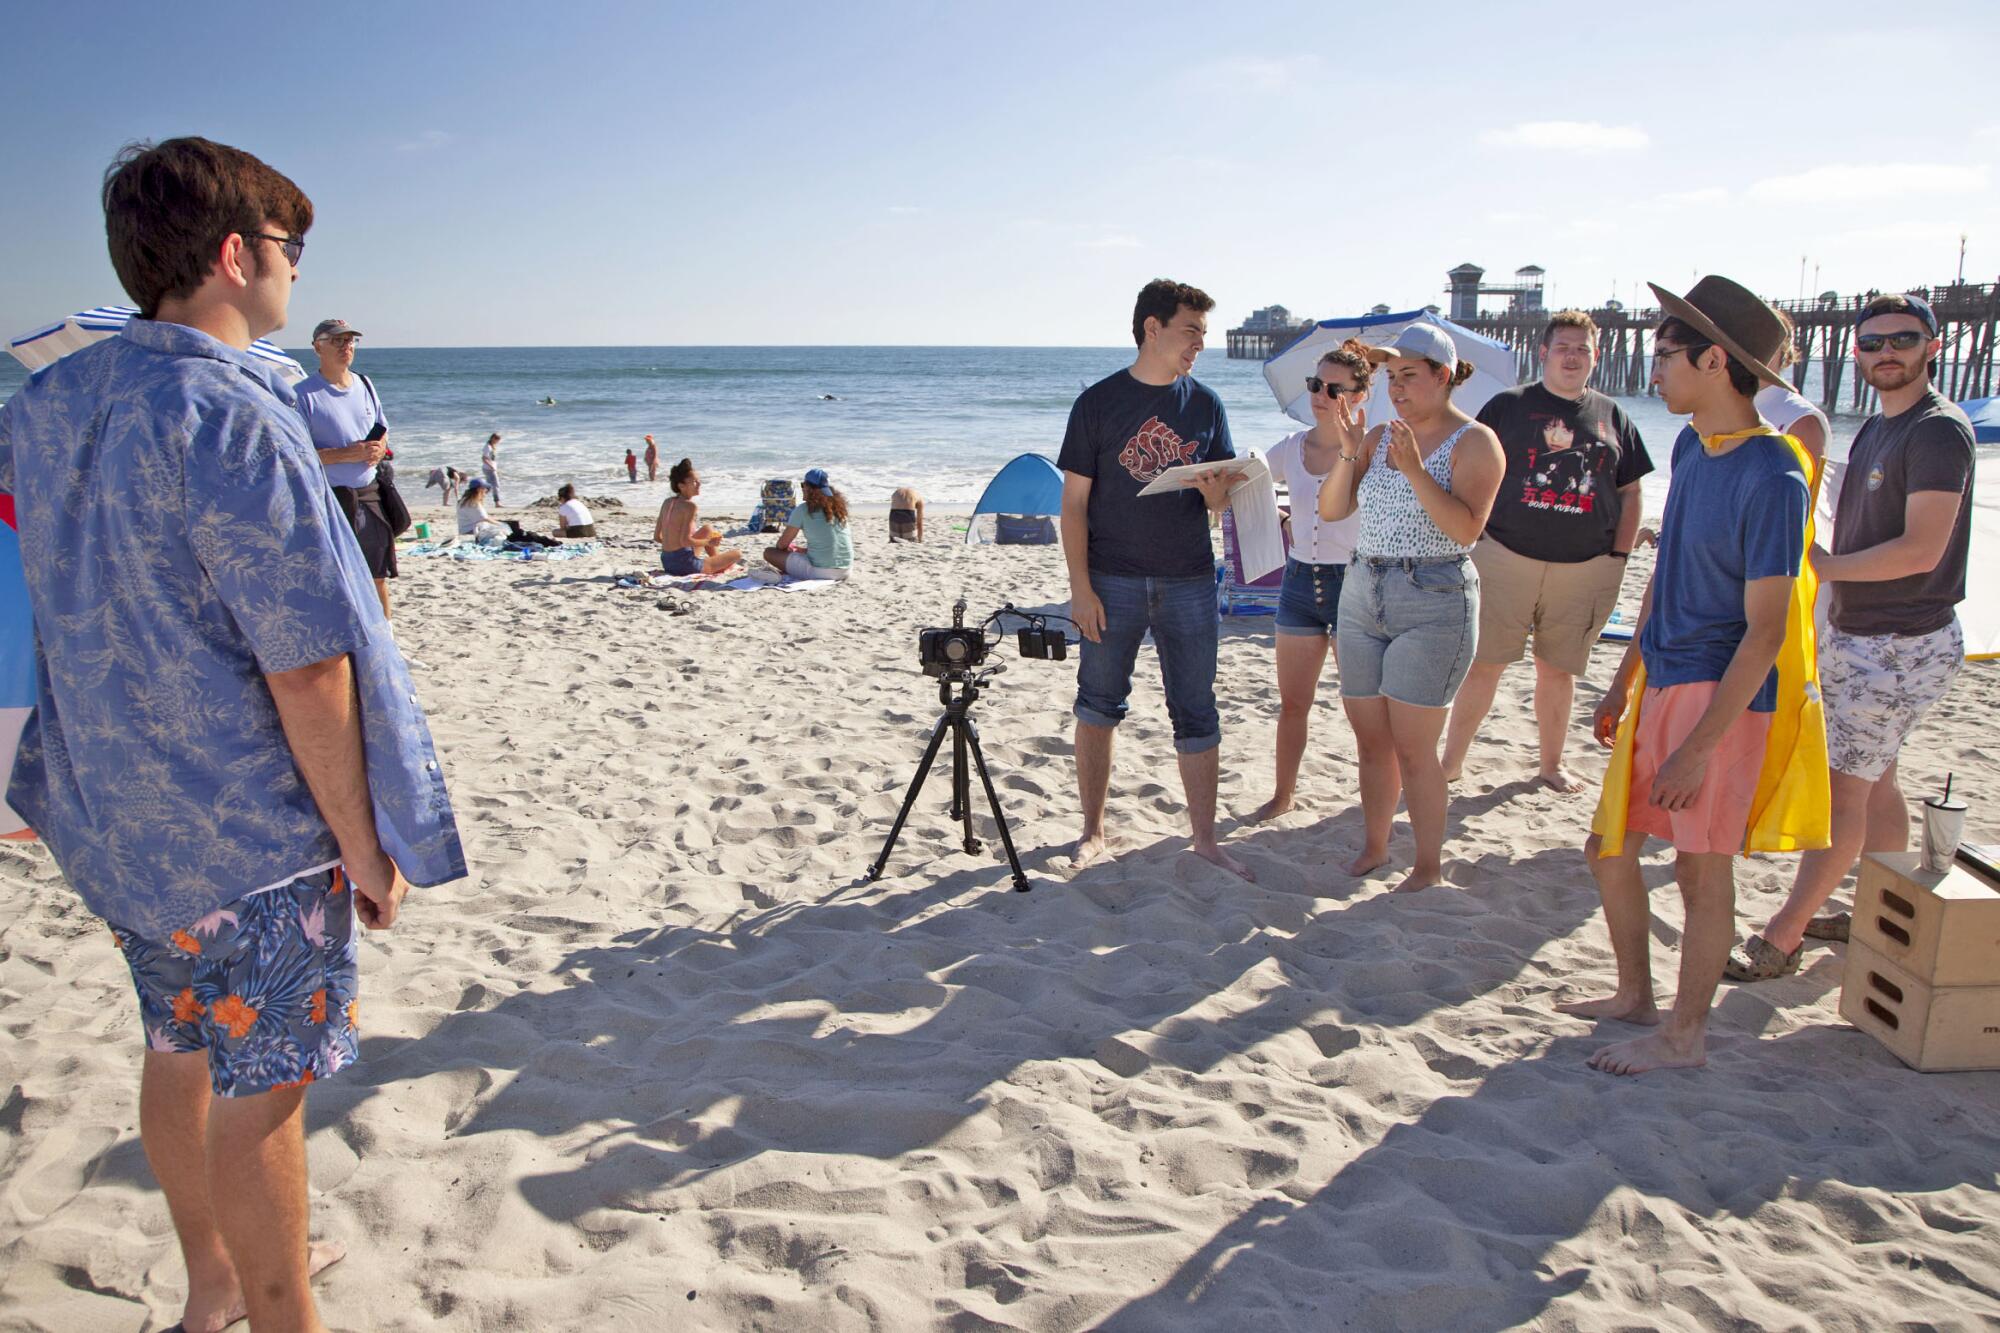 Film students from John Paul the Great Catholic University shoot a brief comedy video in Oceanside.